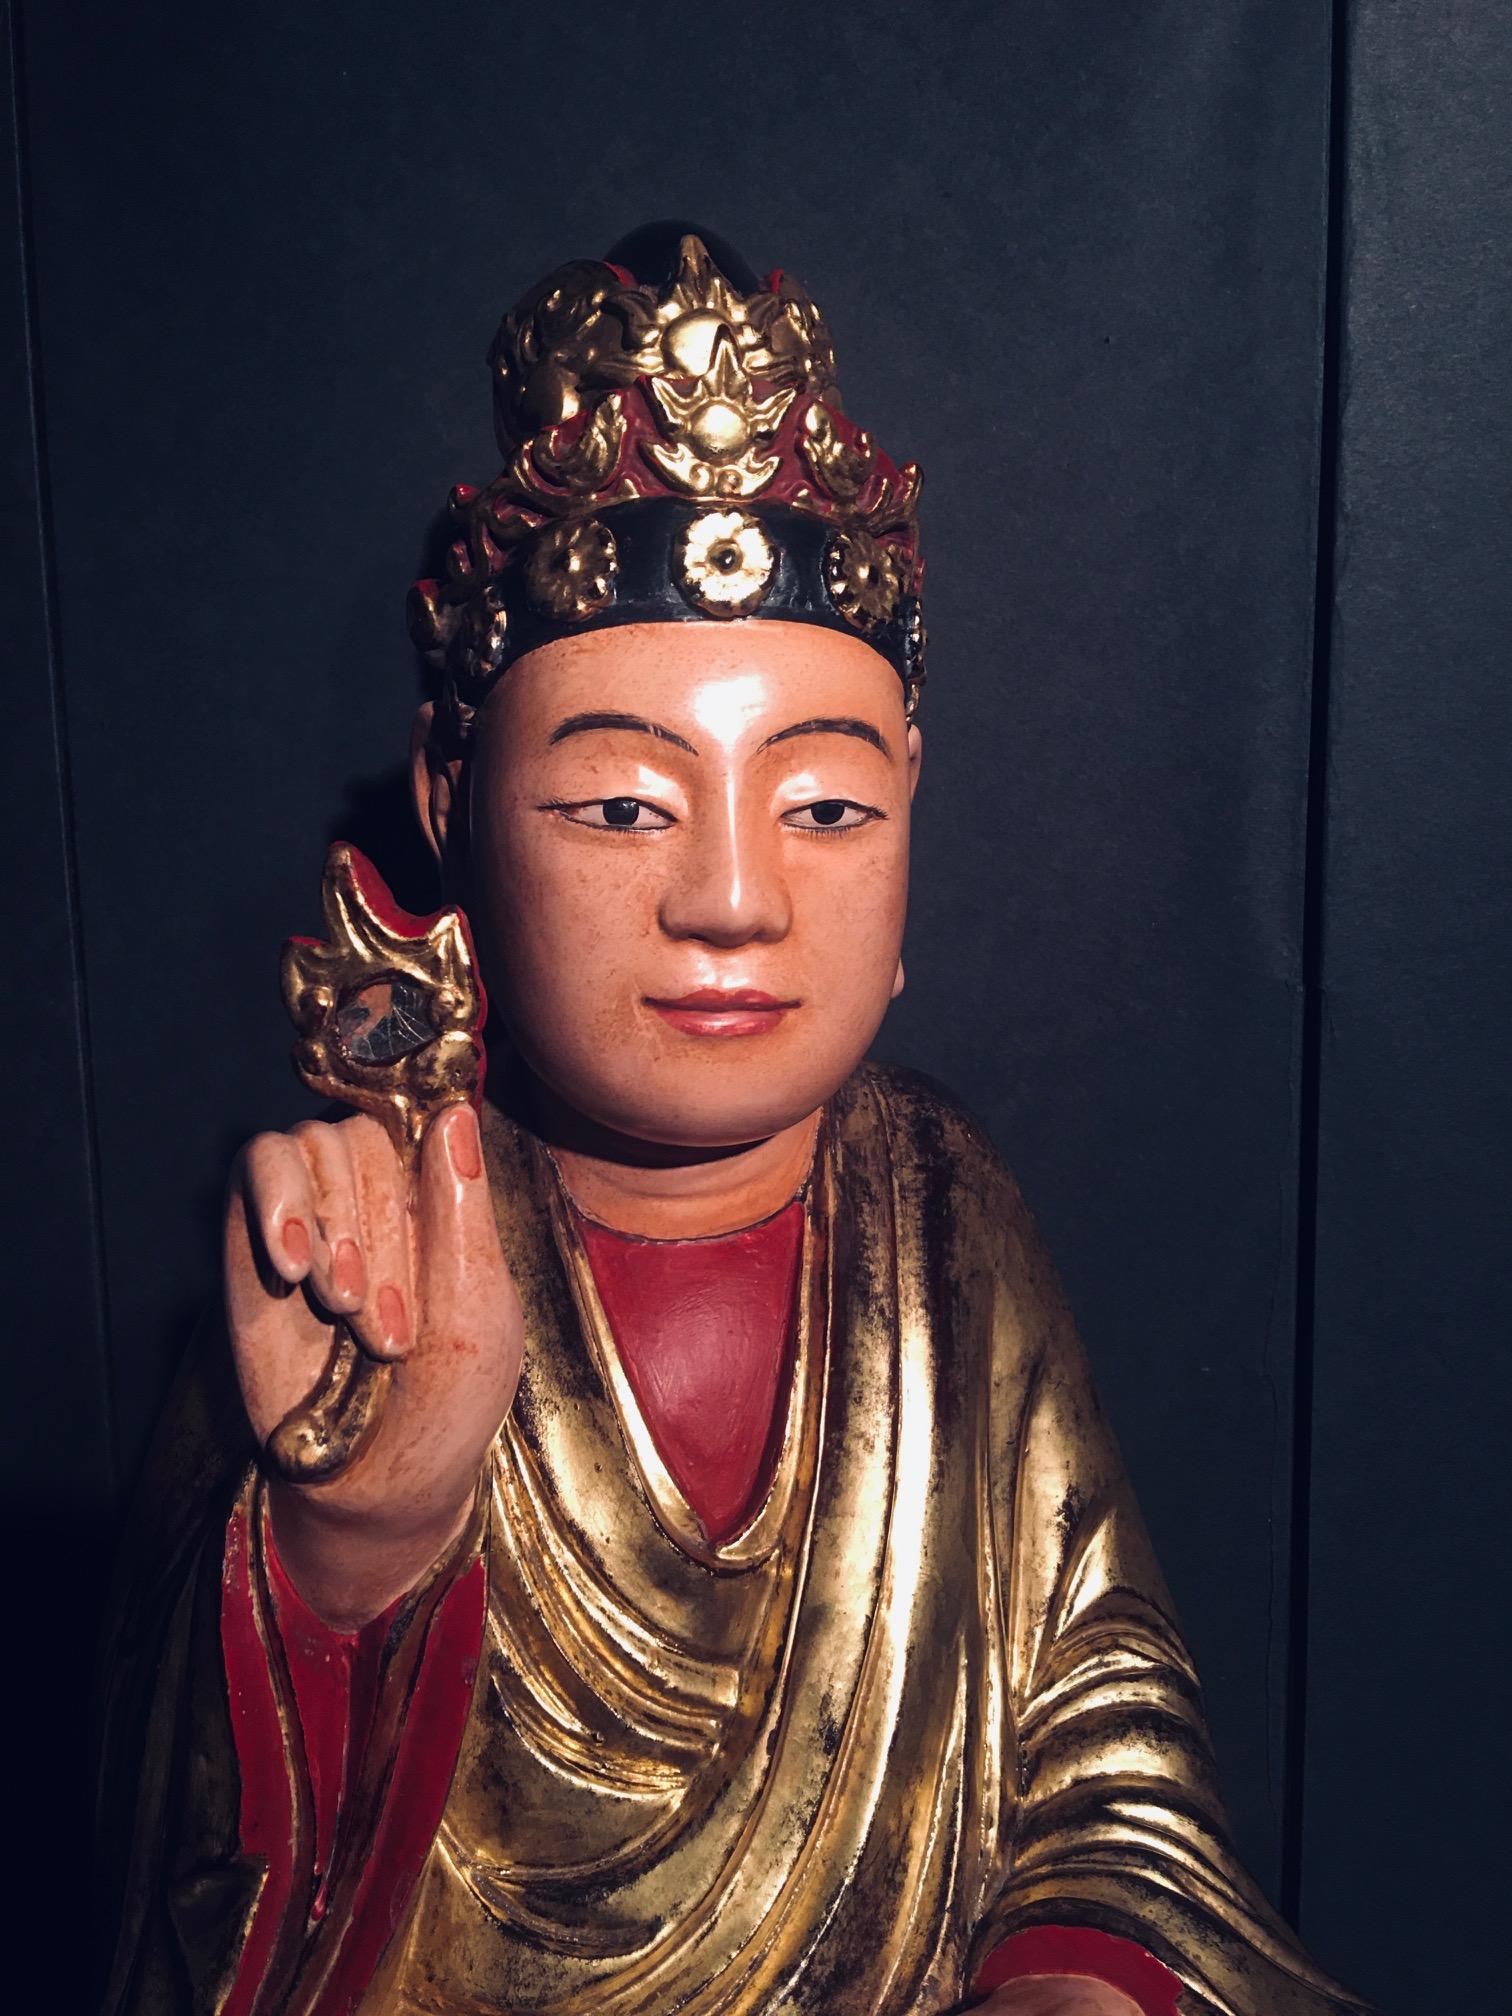 Vietnamese 19th century carved, lacquered and gilt Bodhisattva holding a secret flower. The Bodhisattva is seated on a lotus, which represents the symbol of fortune. This symbol can be found throughout Buddhism. It features a mystical presence.